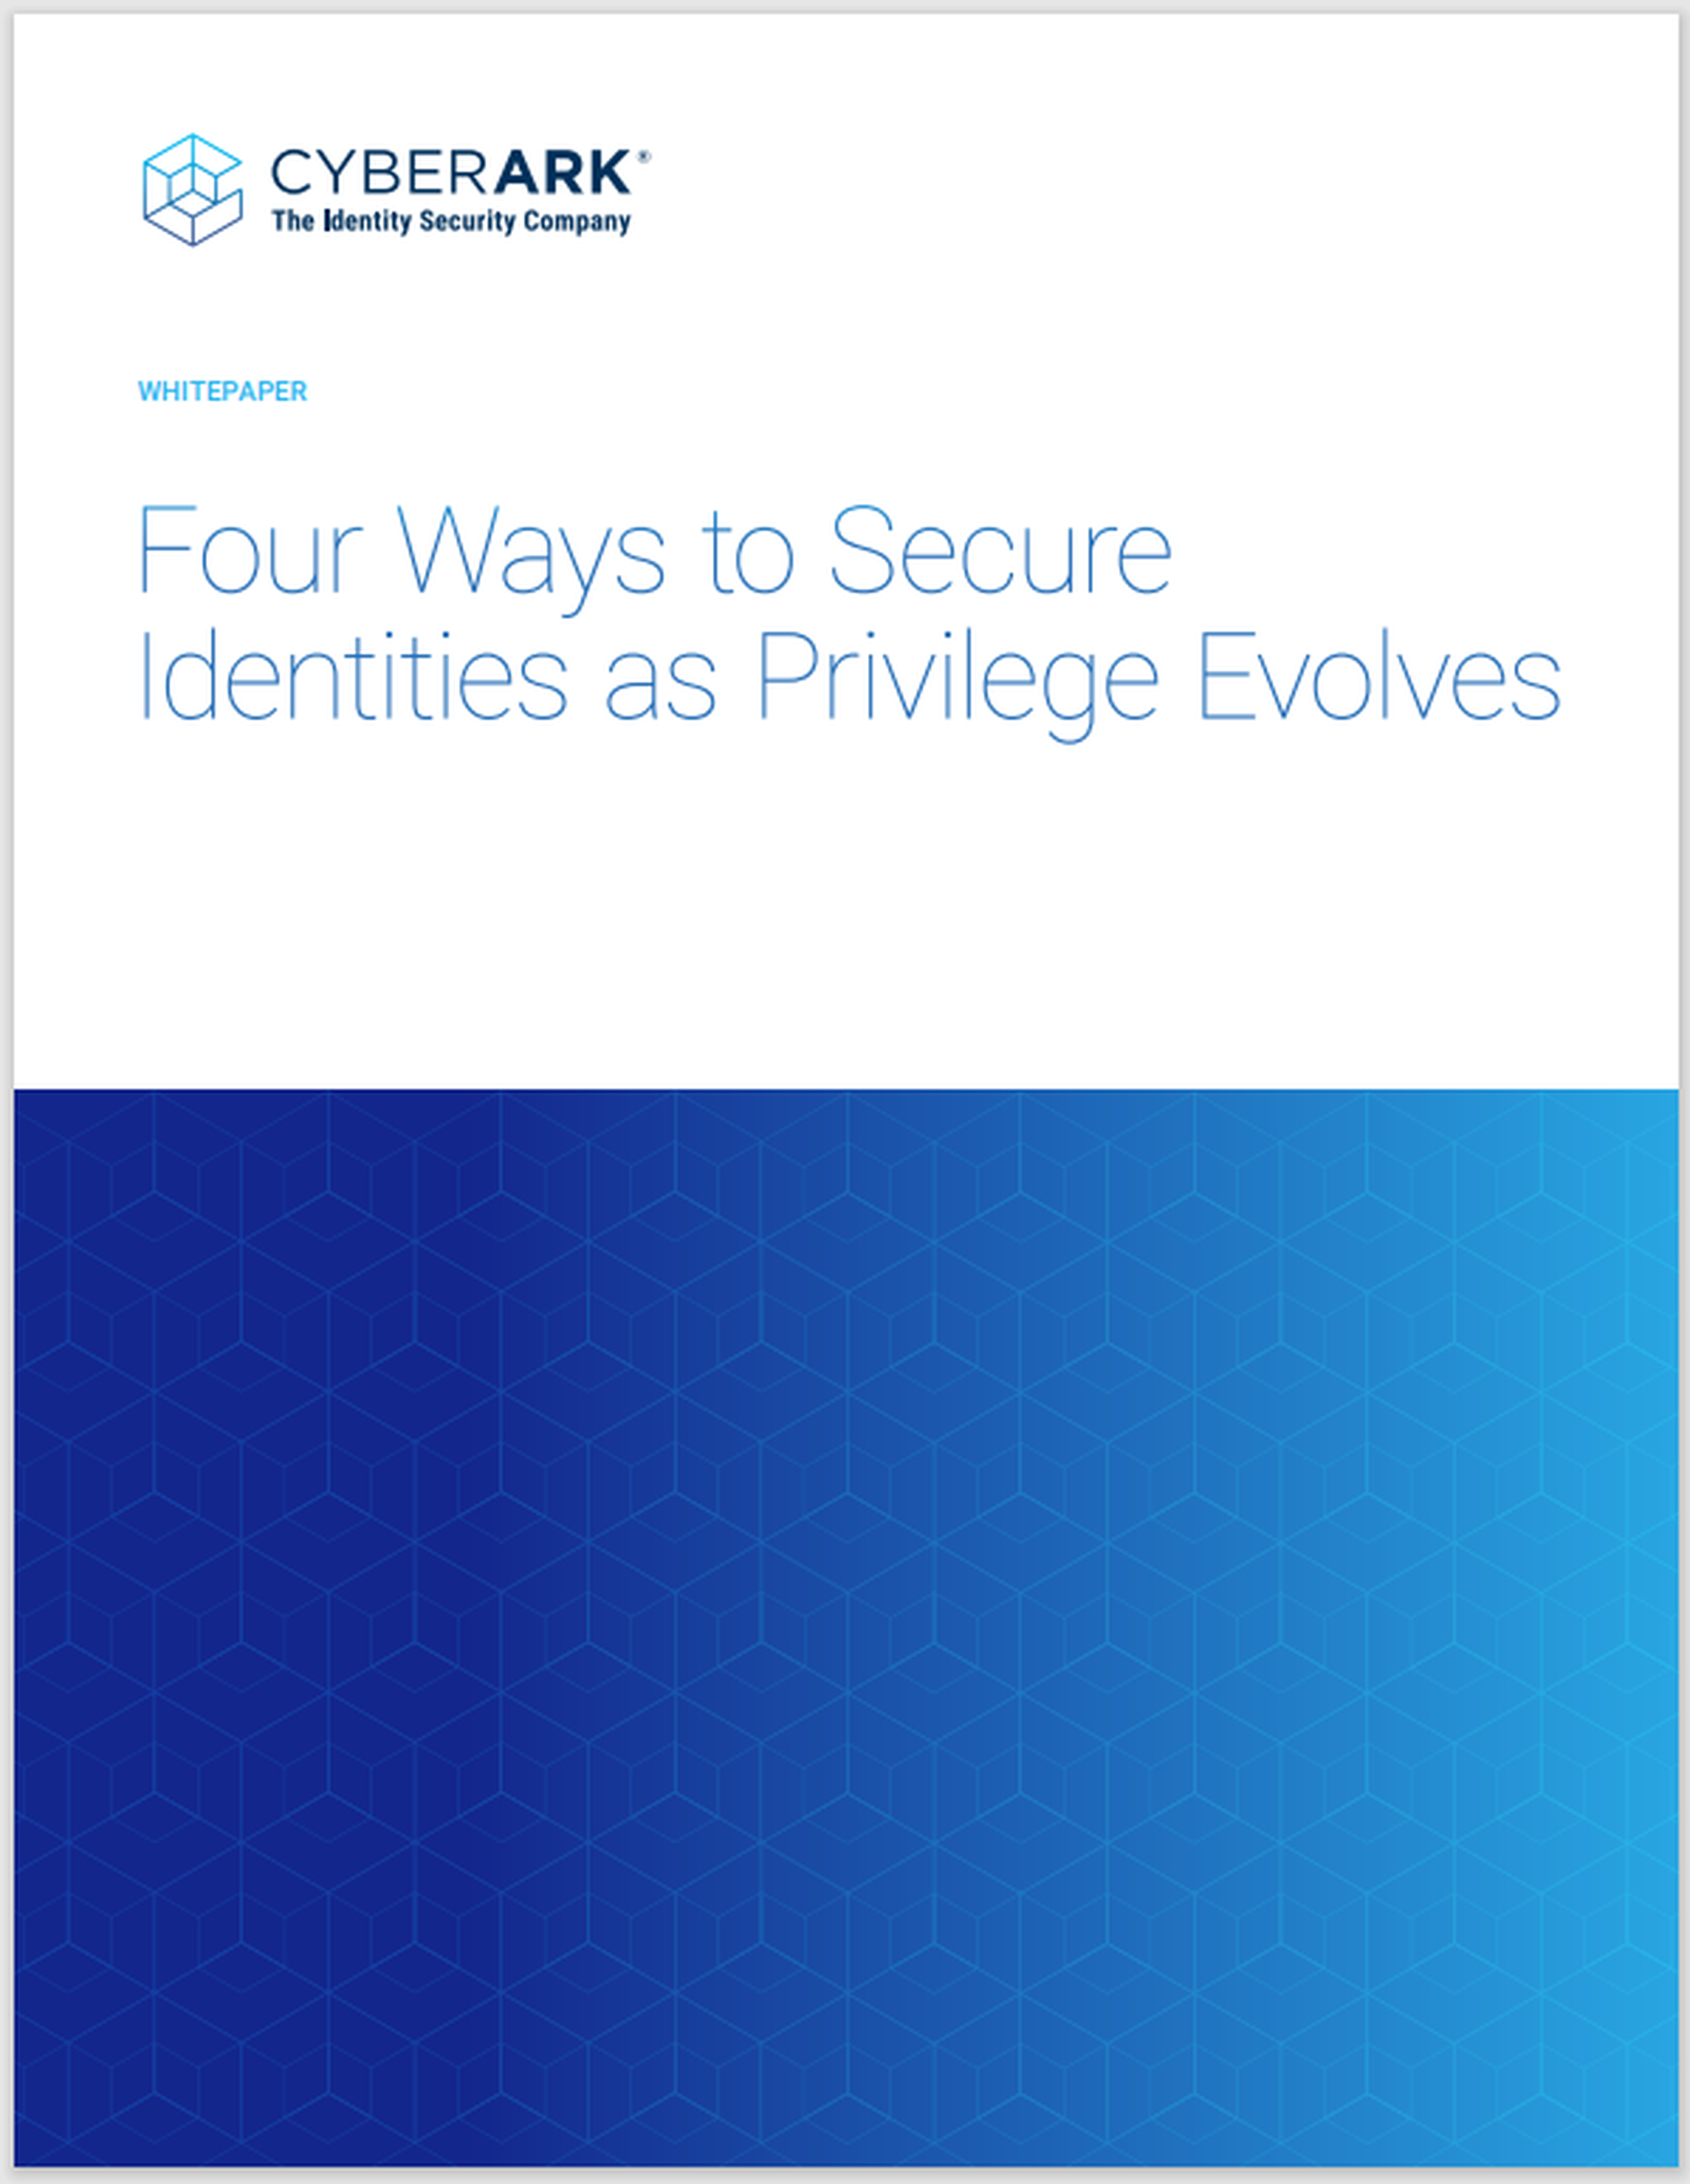 Four Ways to Secure Identities as Privilege Evolves